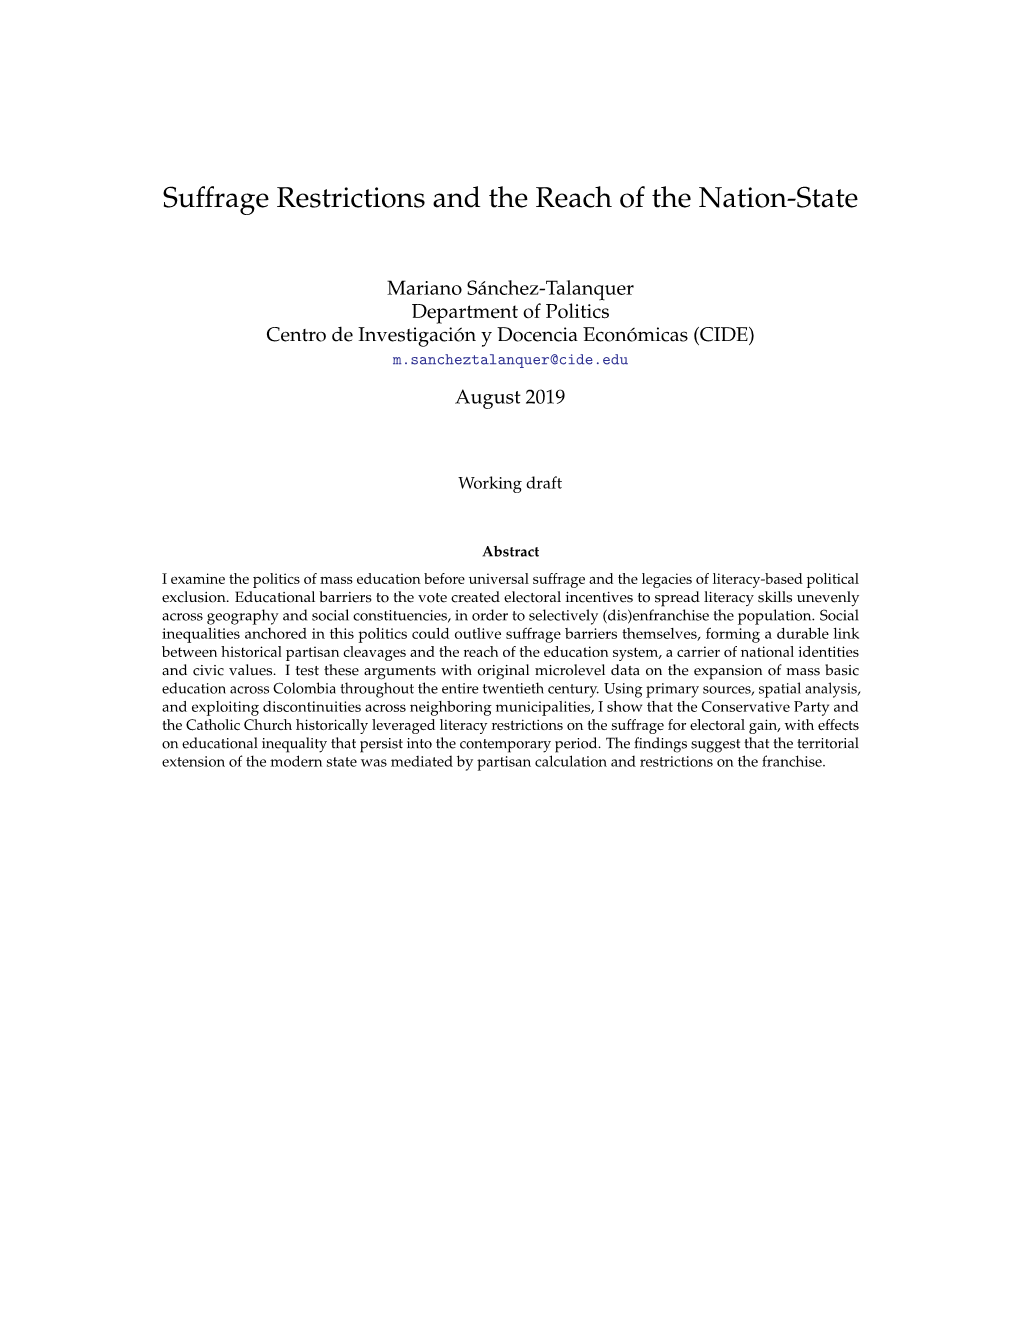 Suffrage Restrictions and the Reach of the Nation-State